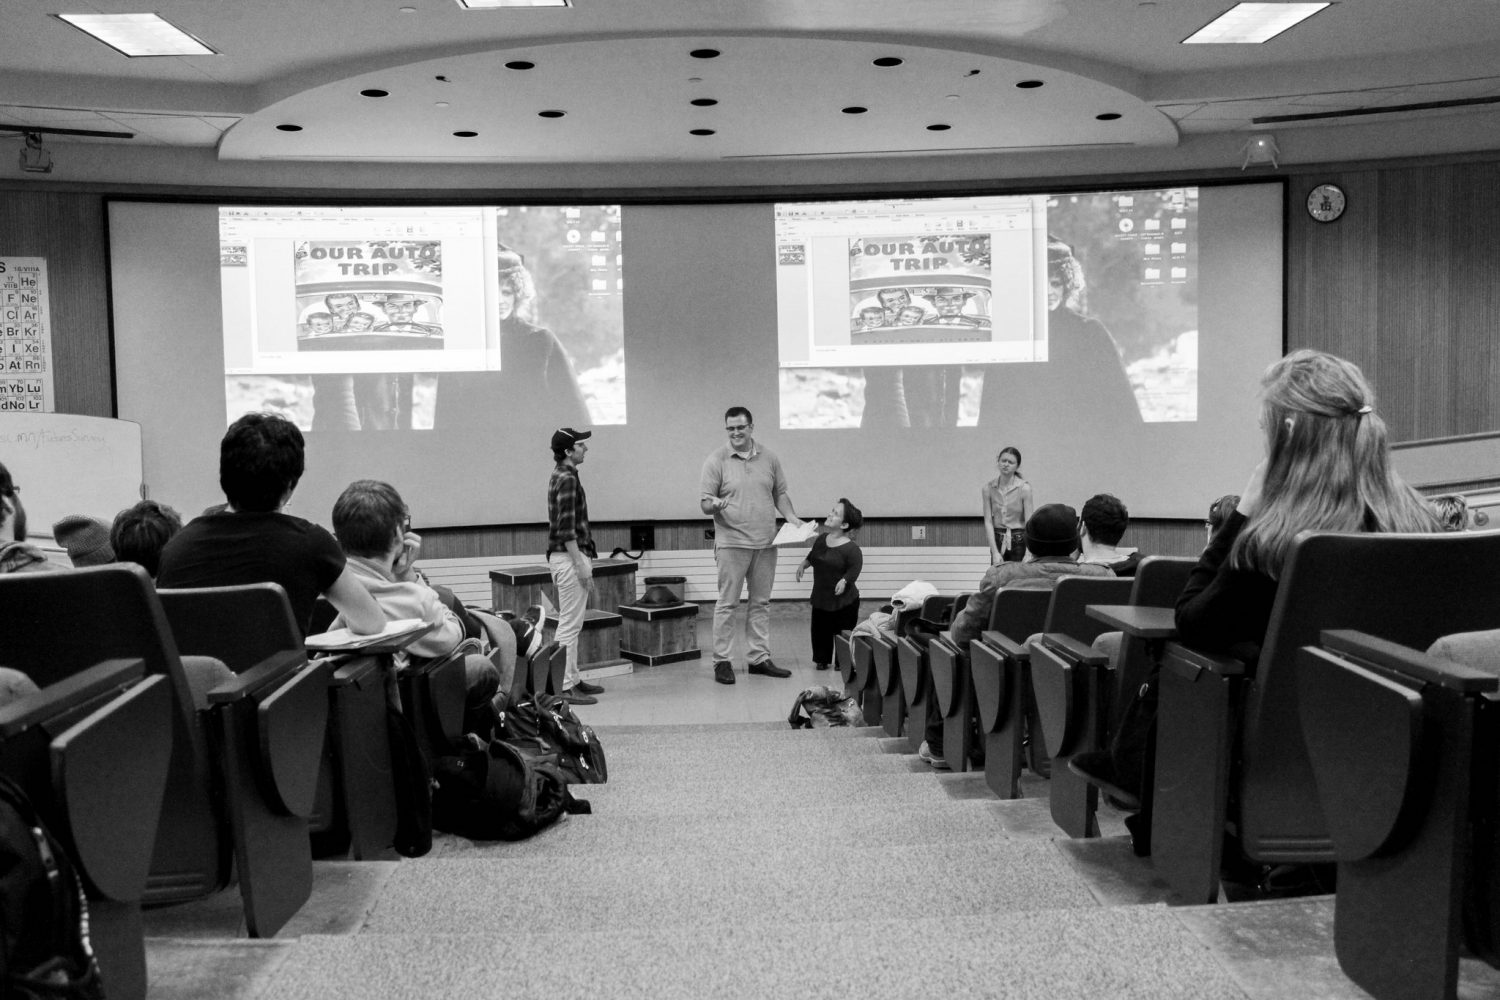 Dr. Jim Williams and Heather Williams presented a lecture Sustaining the Myth of the American Dream, as part of the CLASP Lecture Series and advertised a scene from the upcoming show called Leaving Iowa. Photo Credit: Sarah Murray